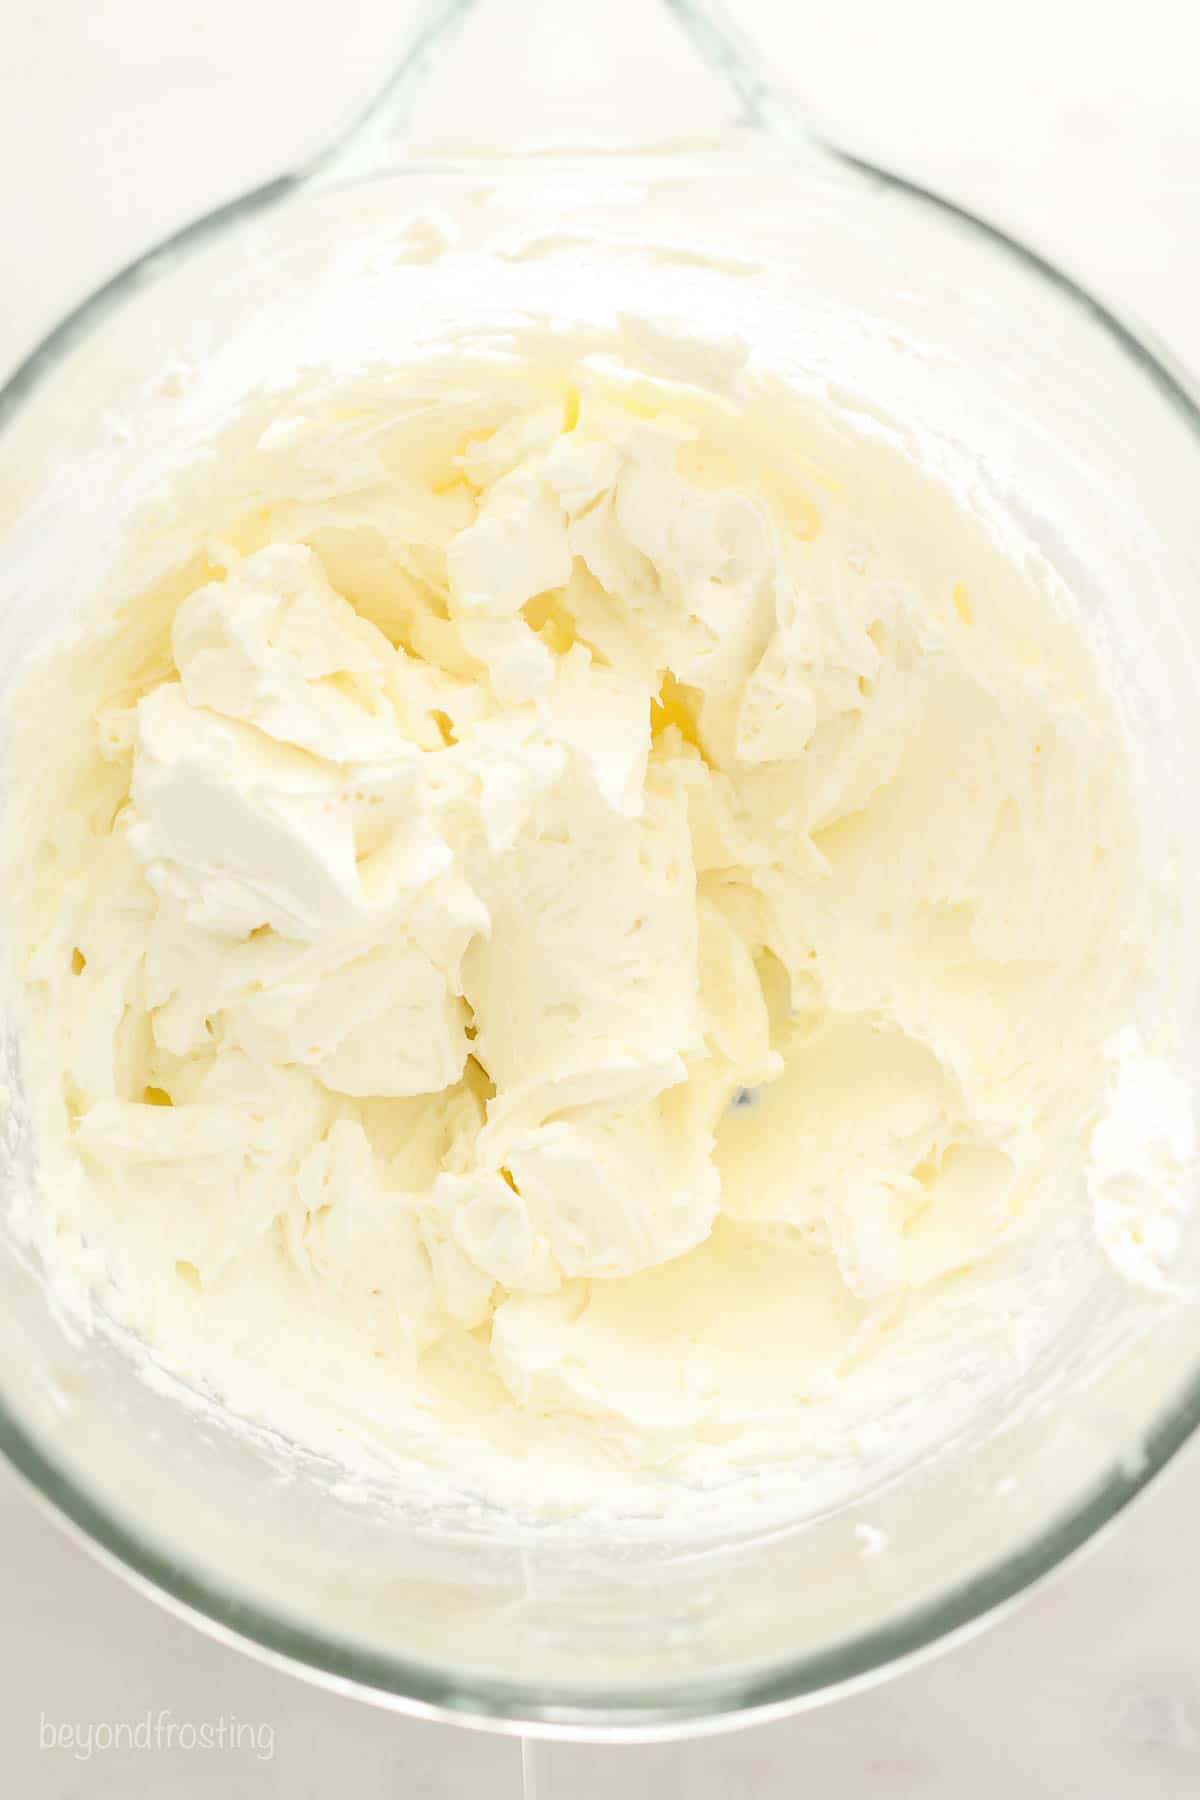 Mascarpone whipped cream in a large mixing bowl